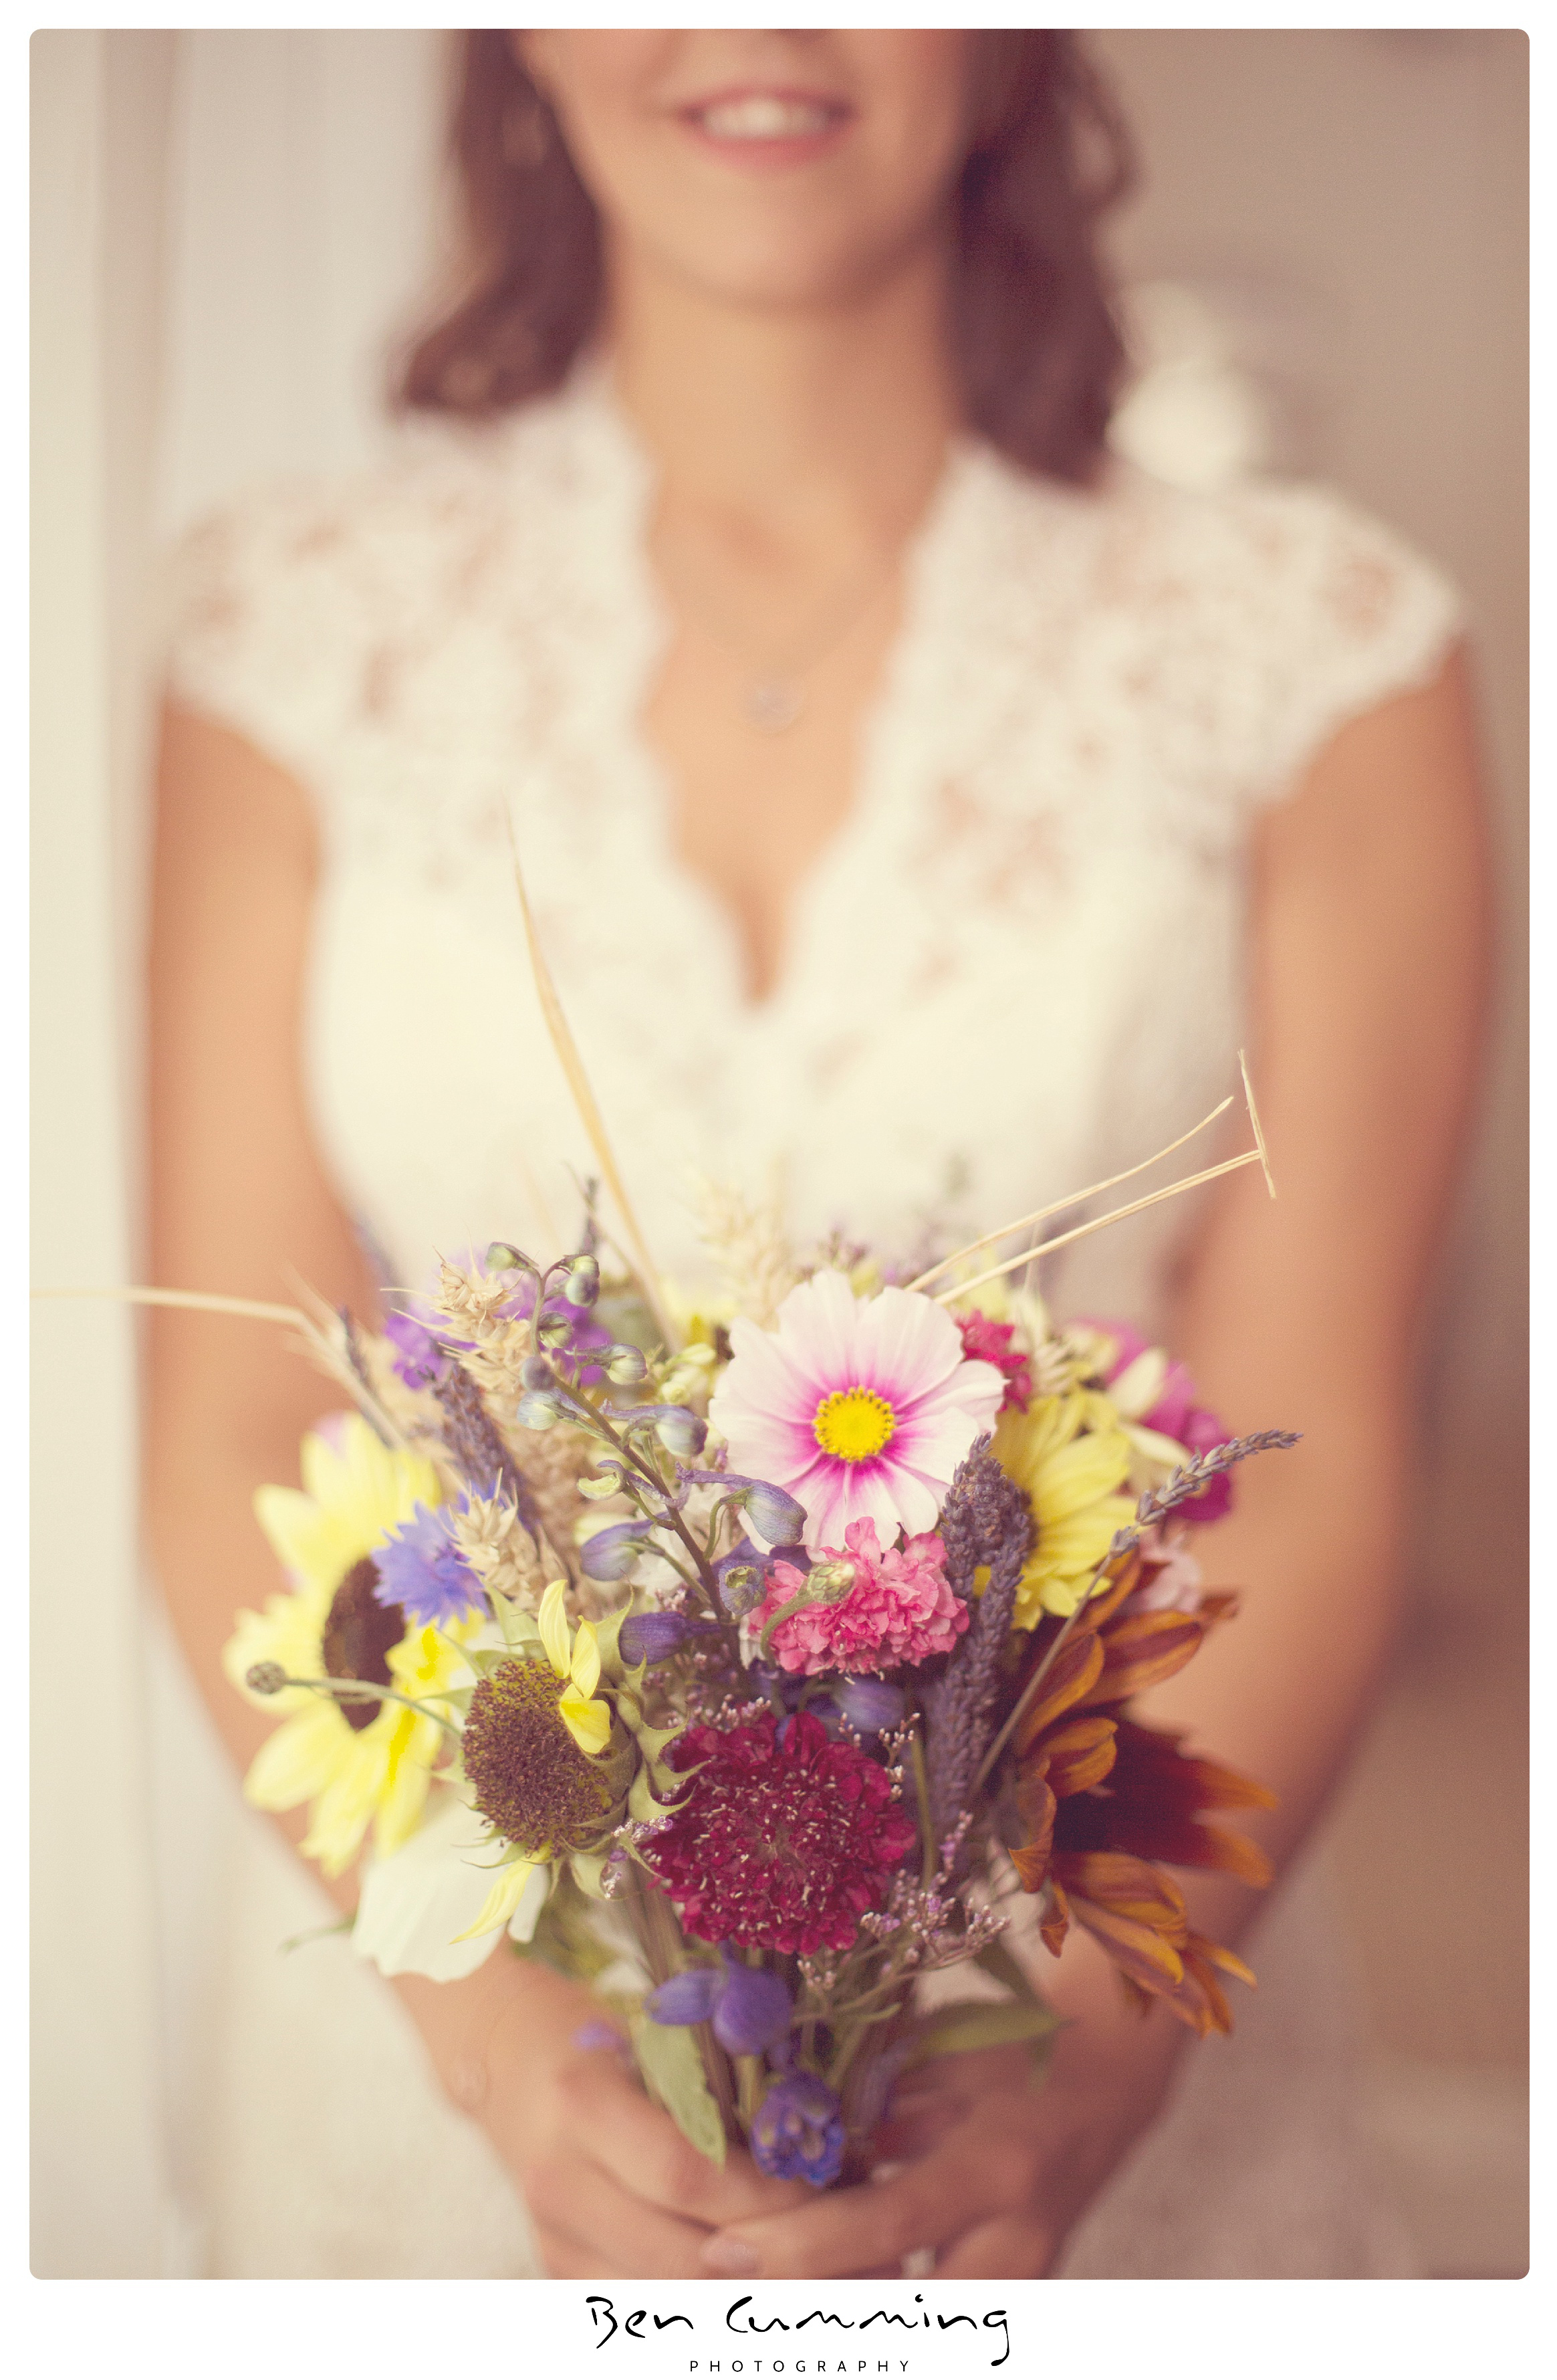 Bride with Wedding Flowers